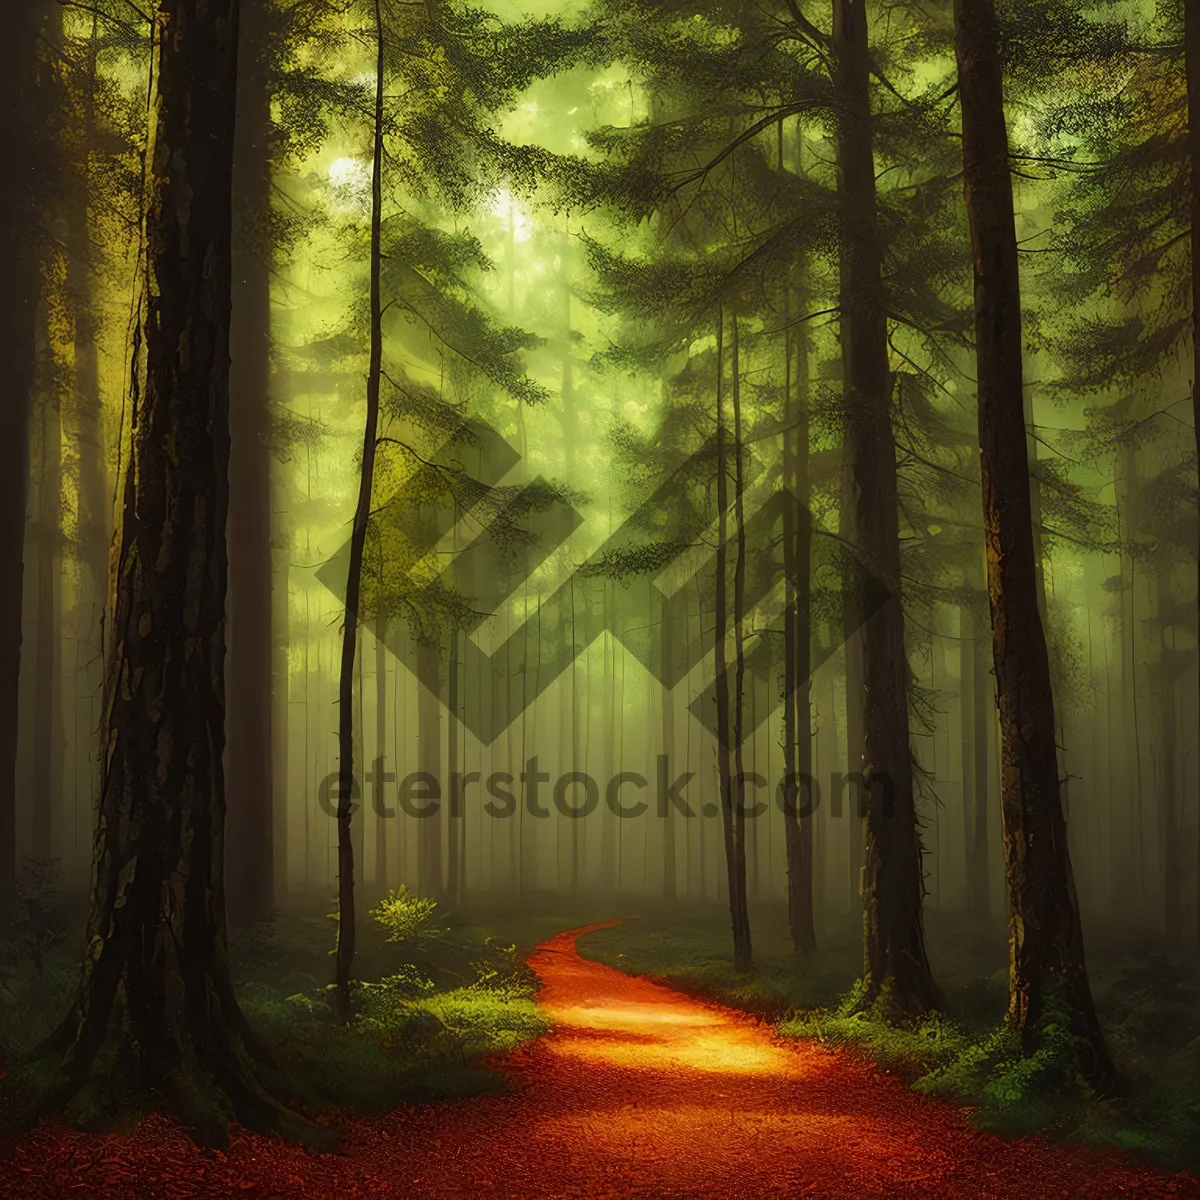 Picture of Misty Woodlands: A Serene Forest Path in Autumn